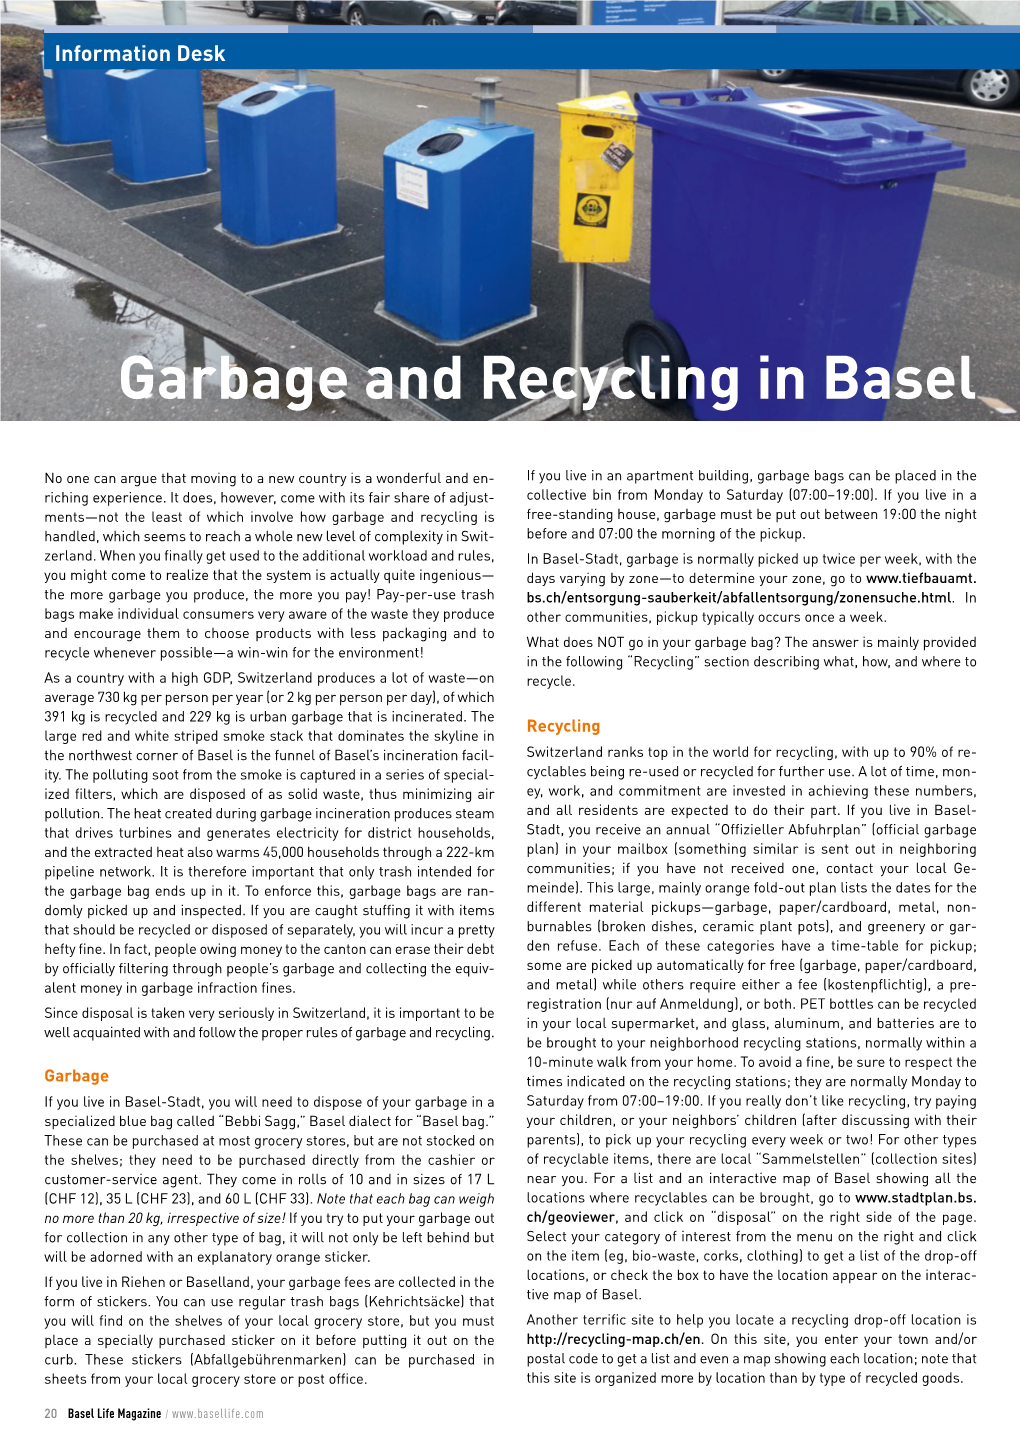 Garbage and Recycling in Basel